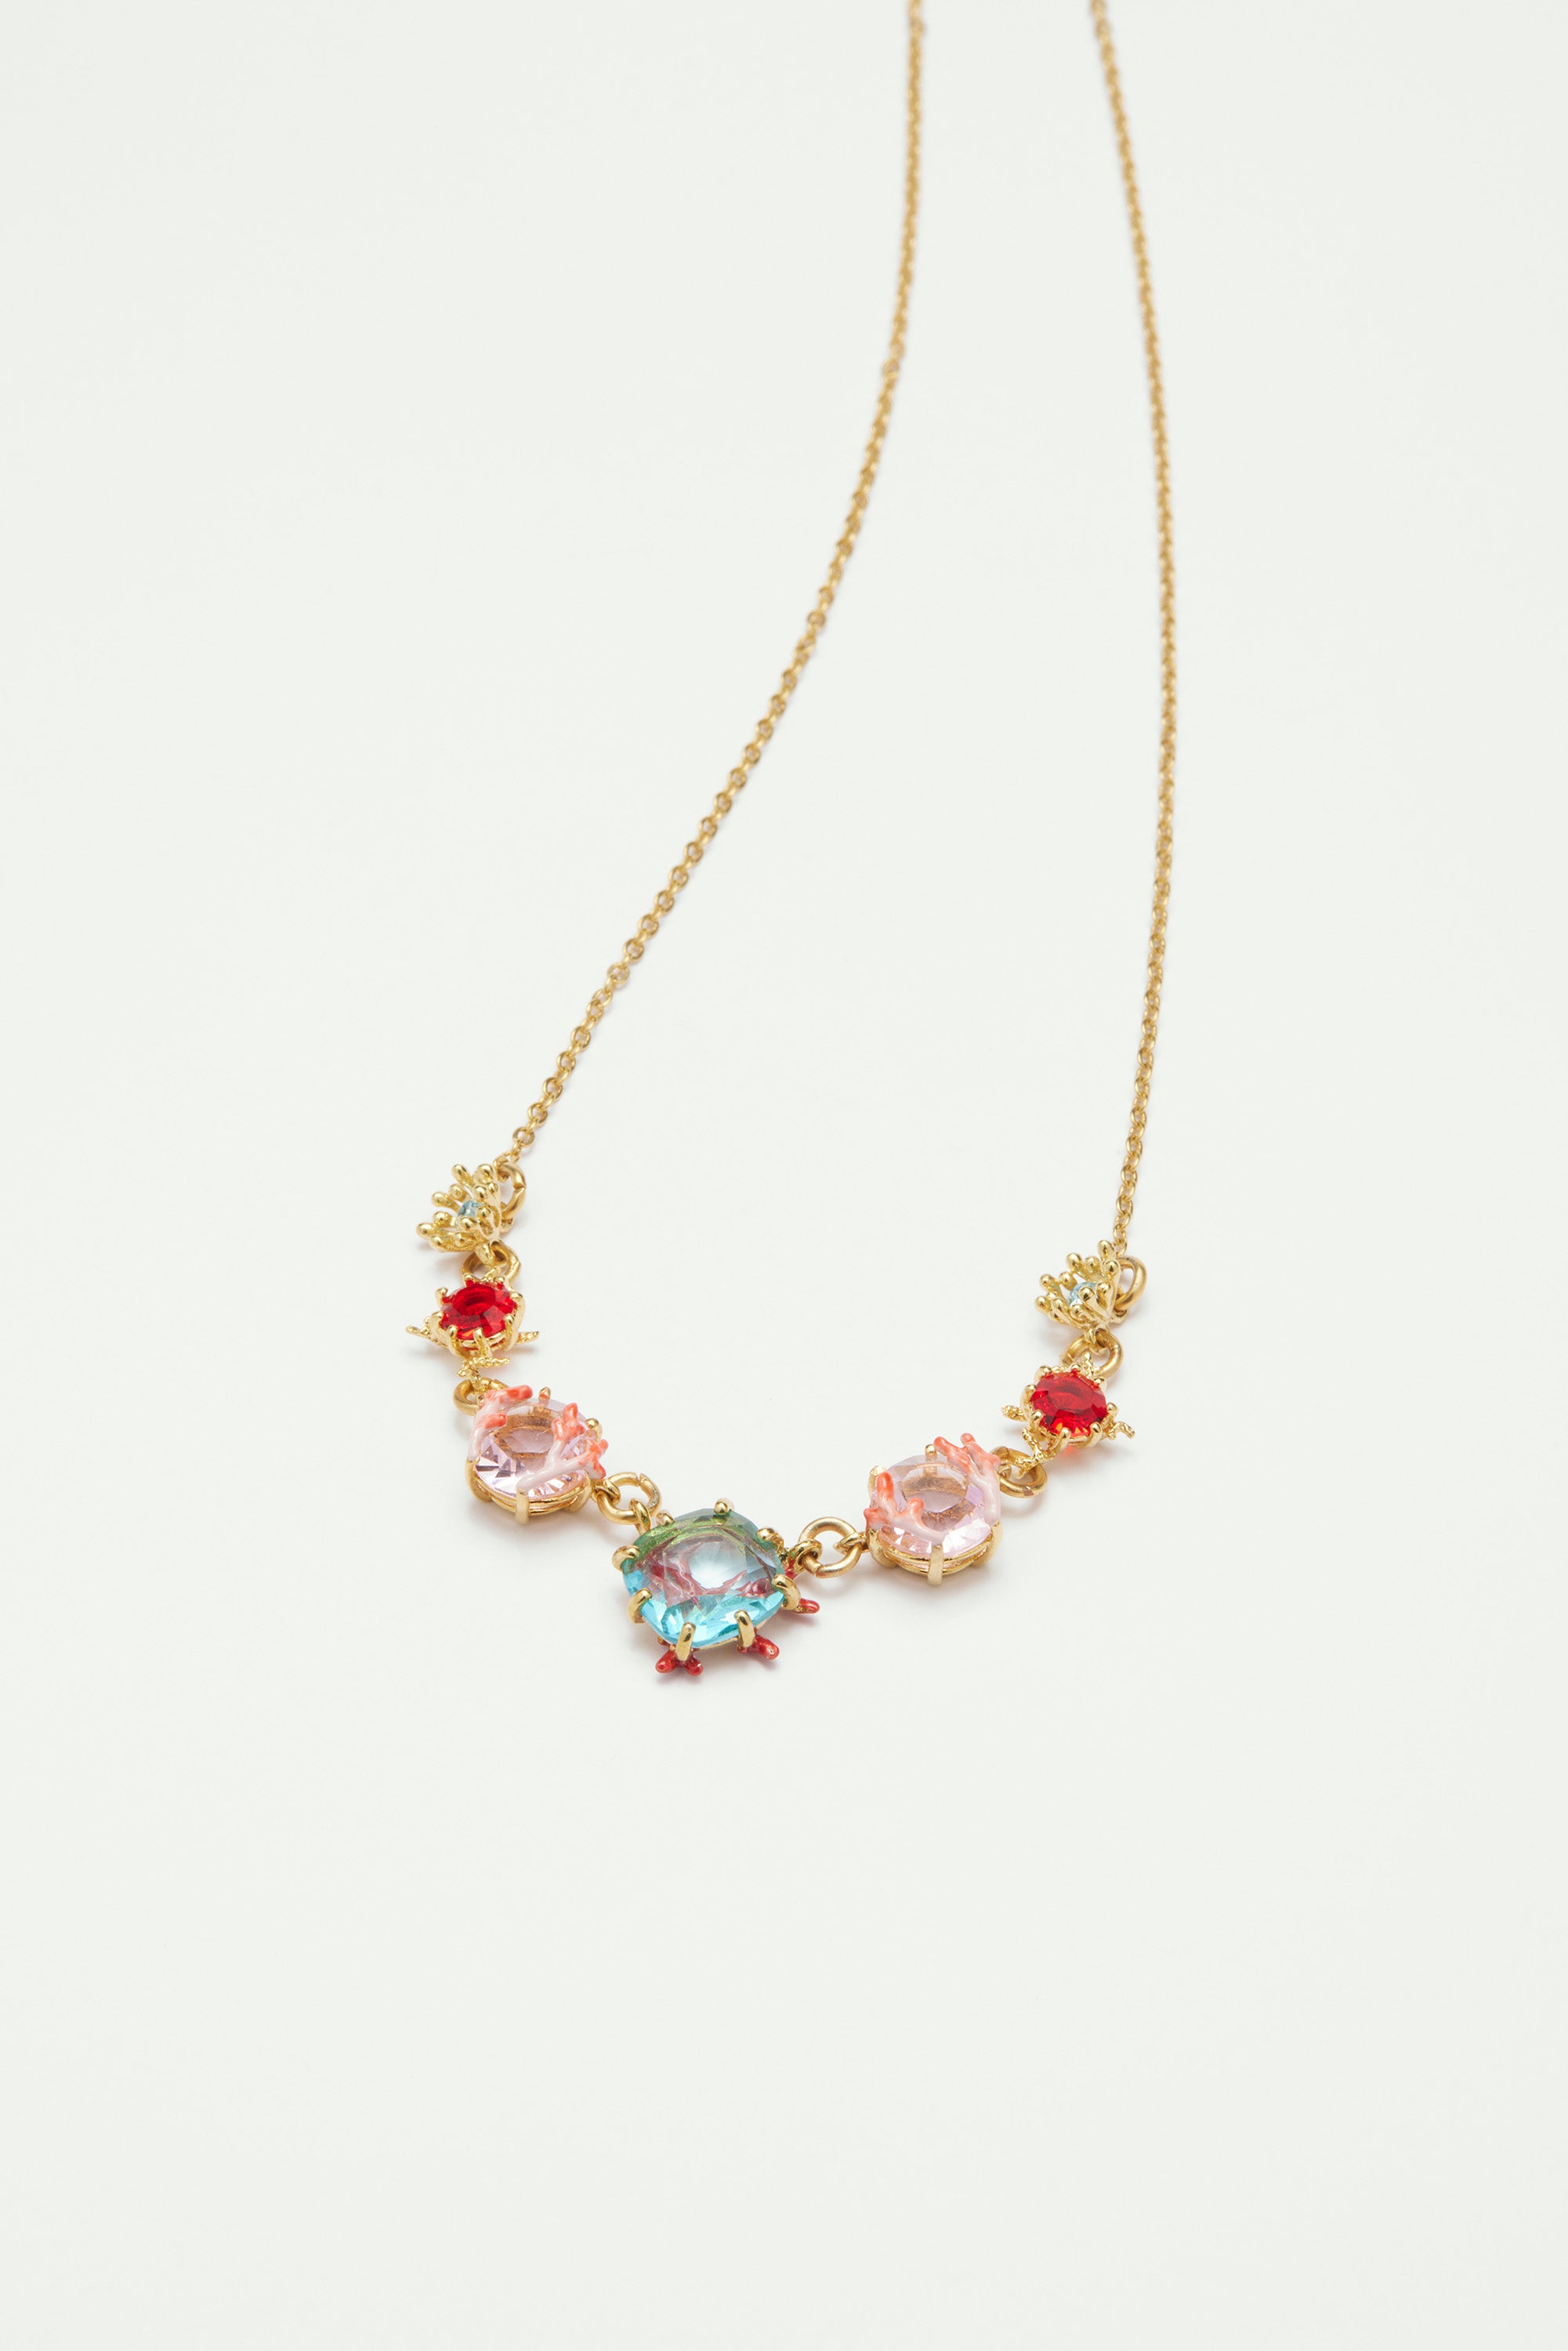 Coral and cut glass tone statement necklace